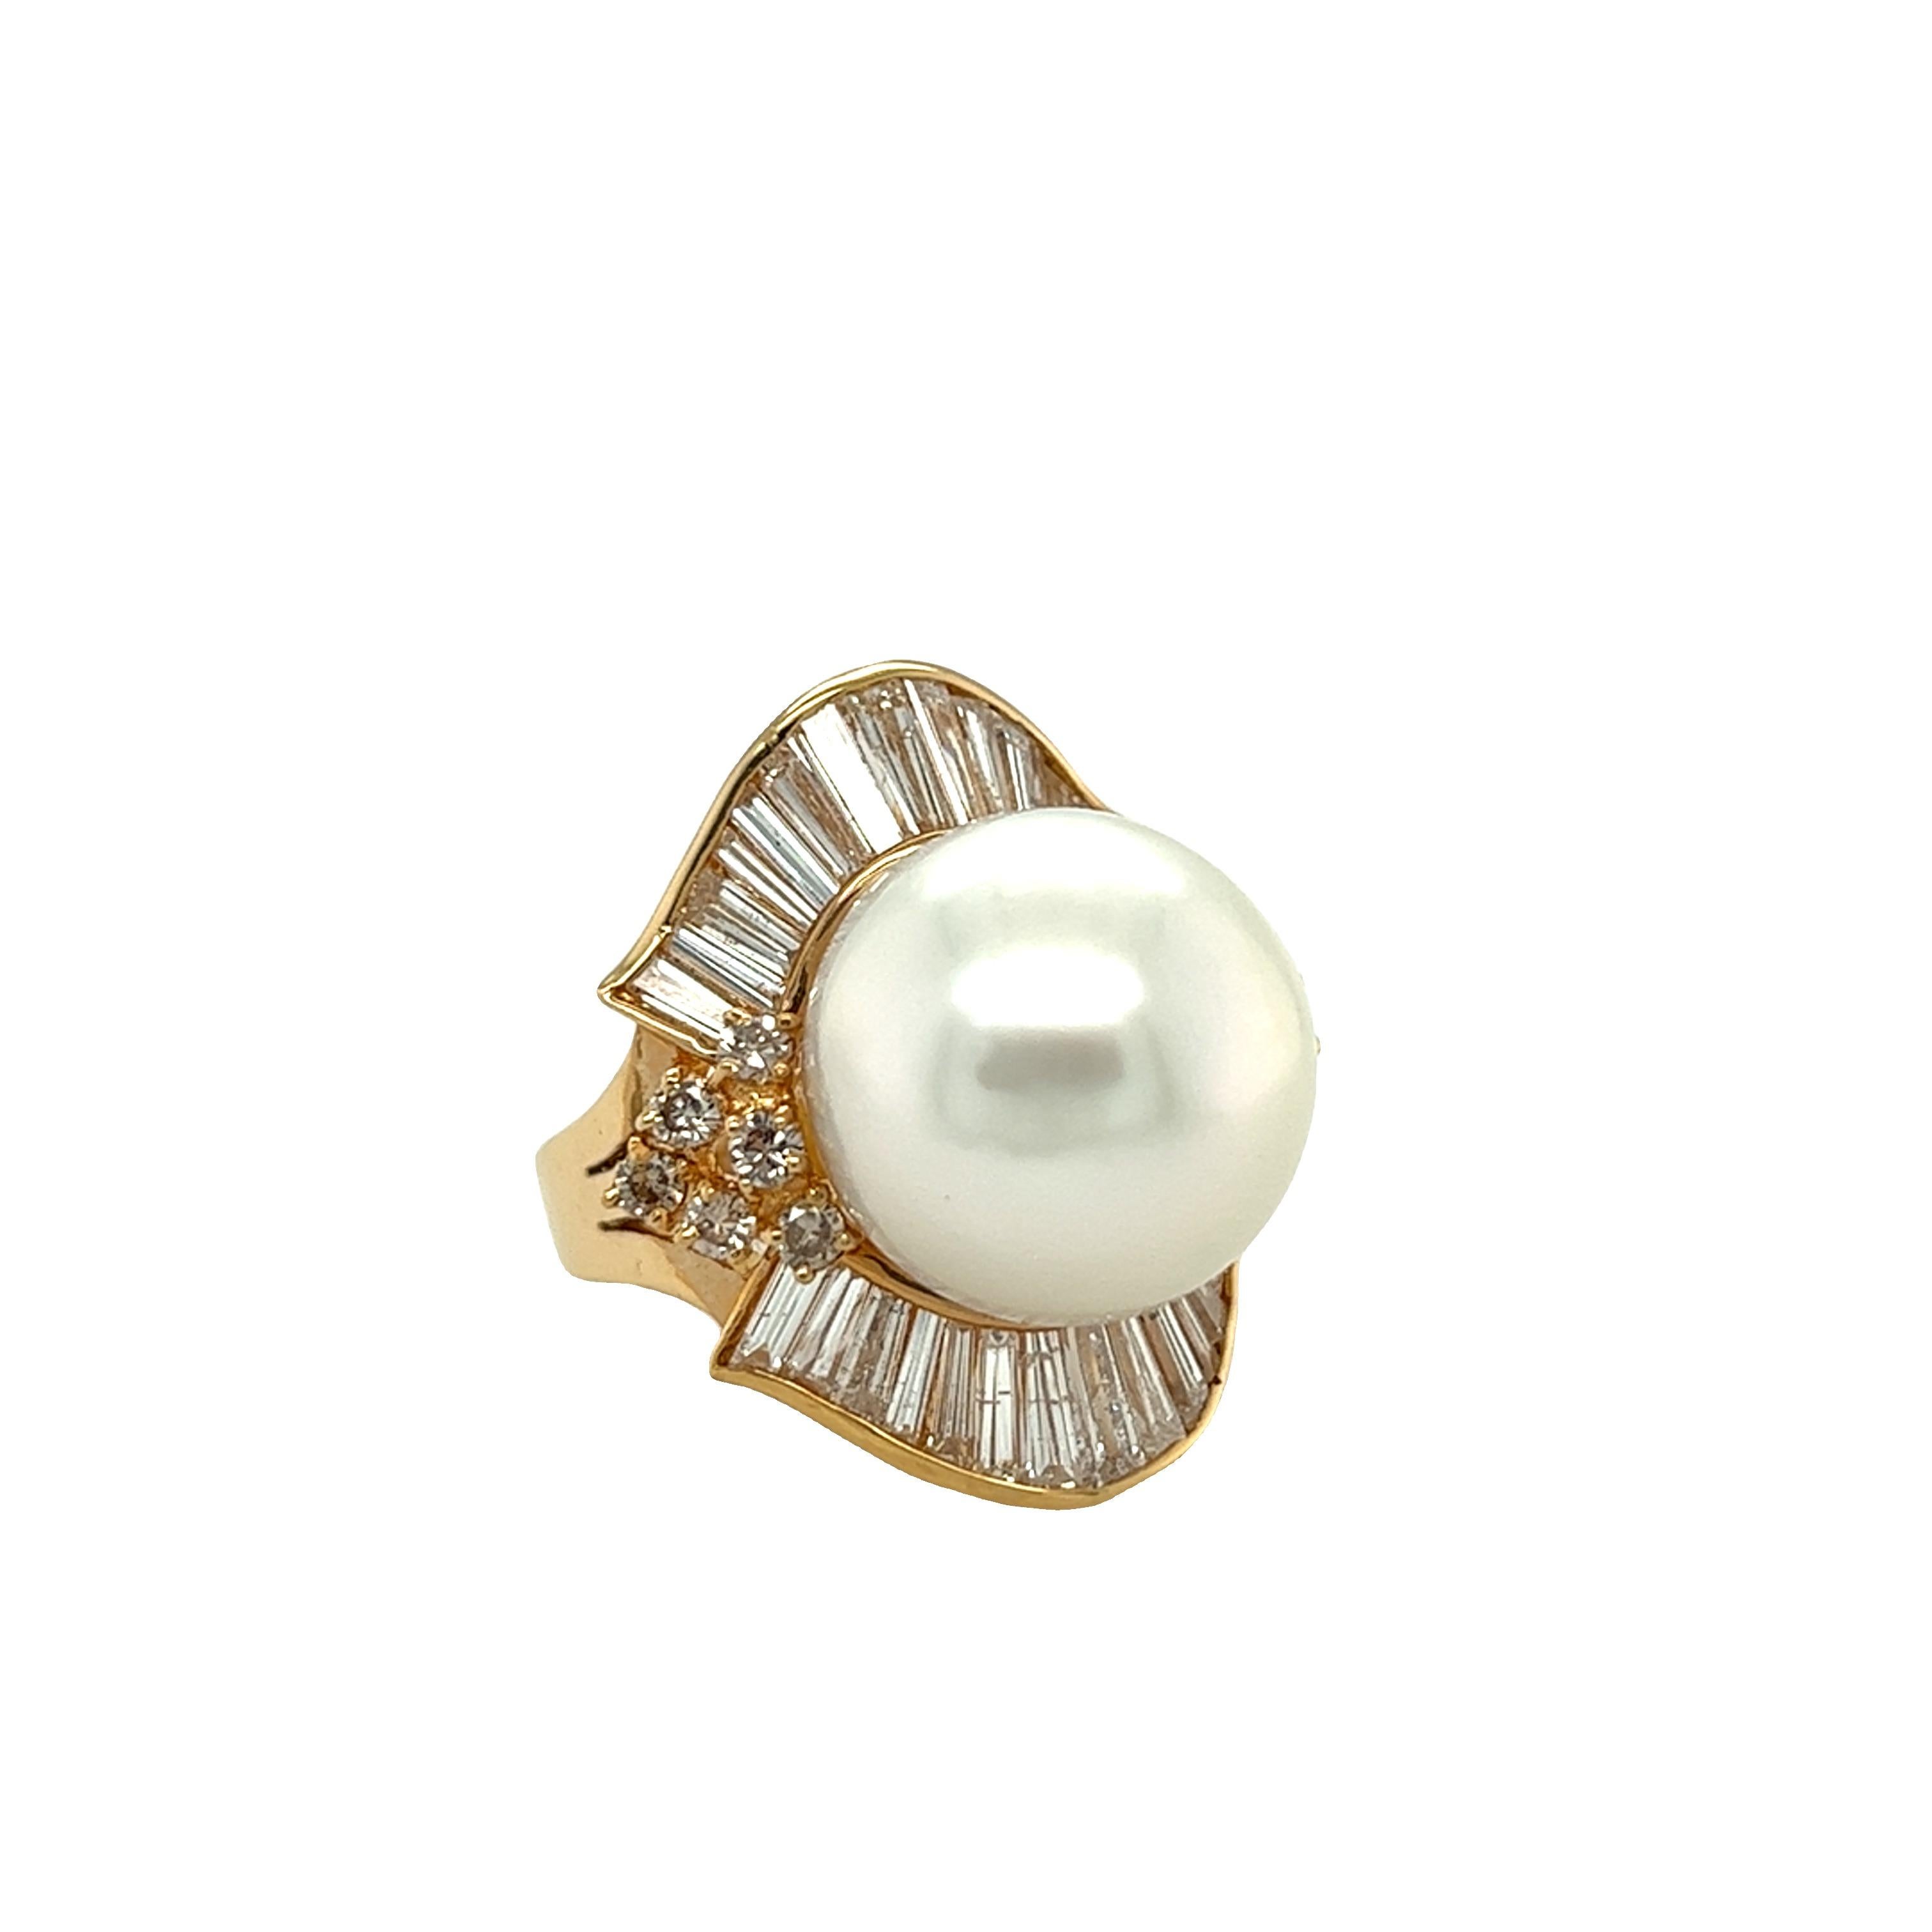 Gorgeous pearl and diamond ring features white round pearl about 14.6 mm. with high luster. The pearl is beautifully wrapped around with round and baguette diamond in ballerina skirt design. It is crafted in 14k gold and is the perfect ring to